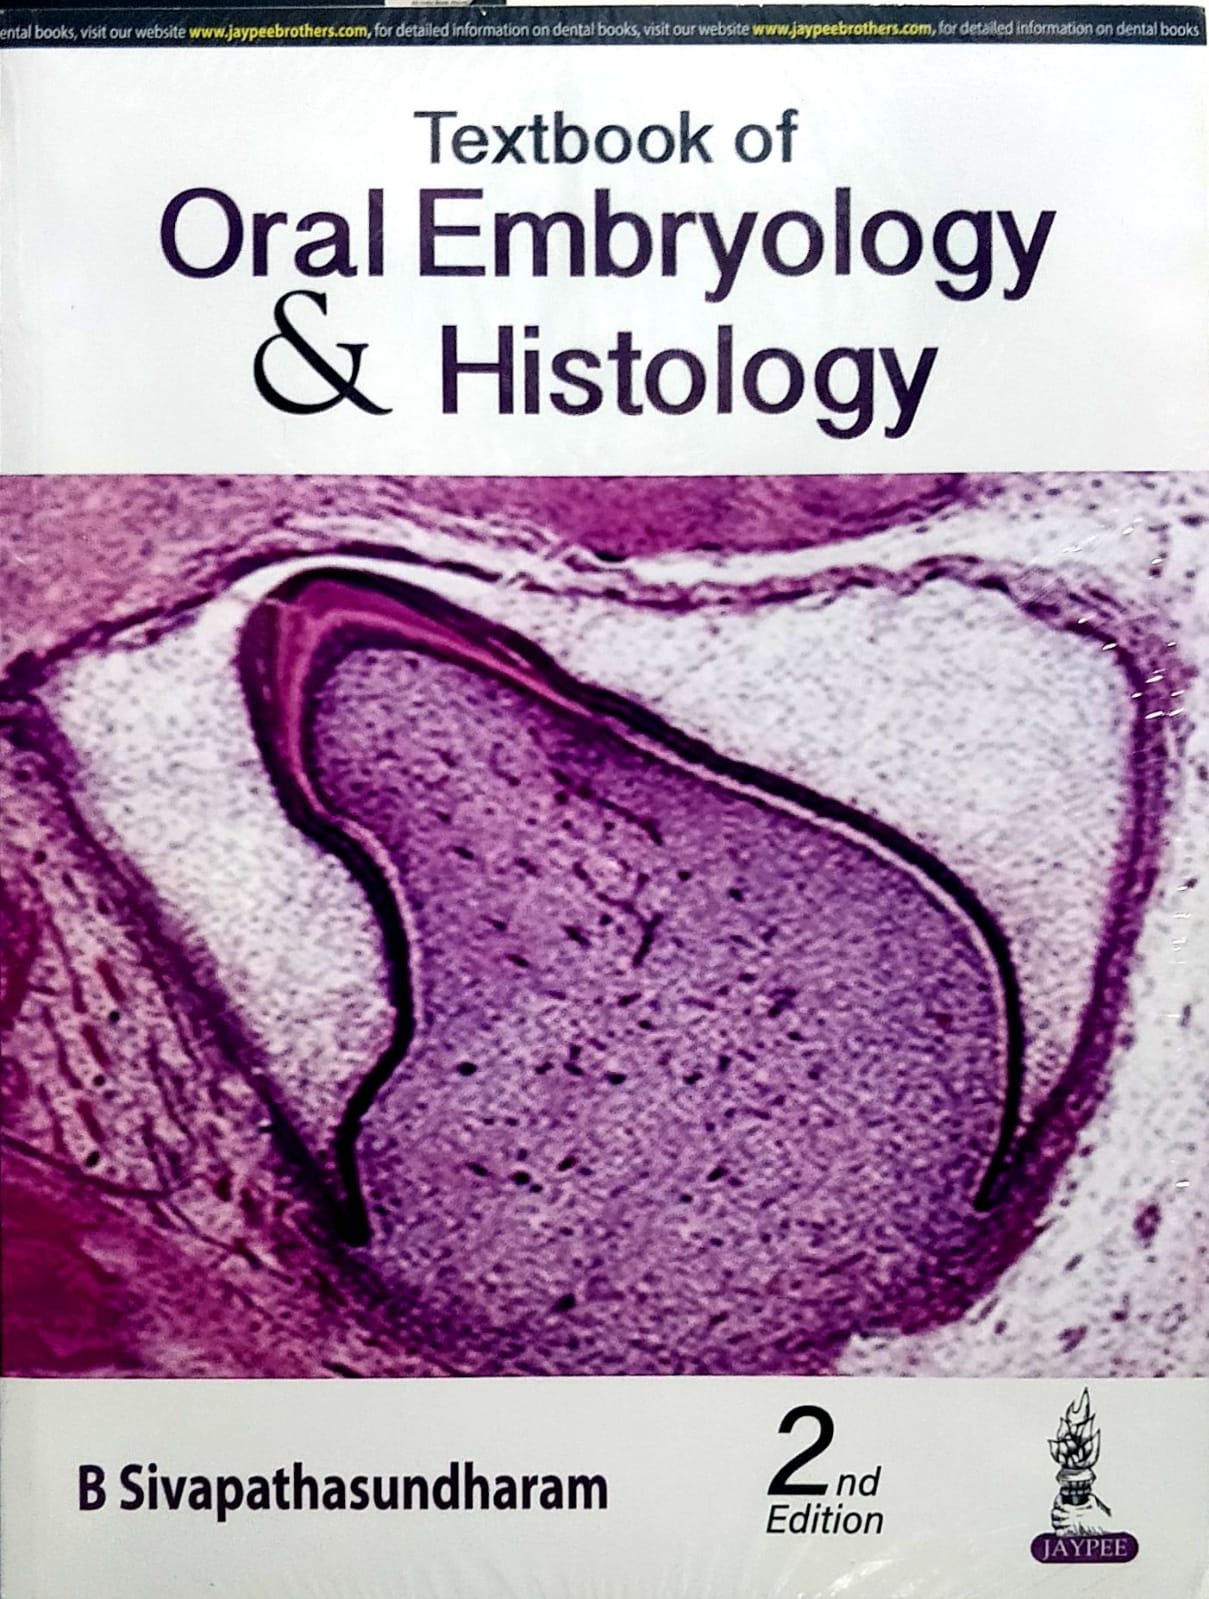 Textbook of Oral Embryology and Histology